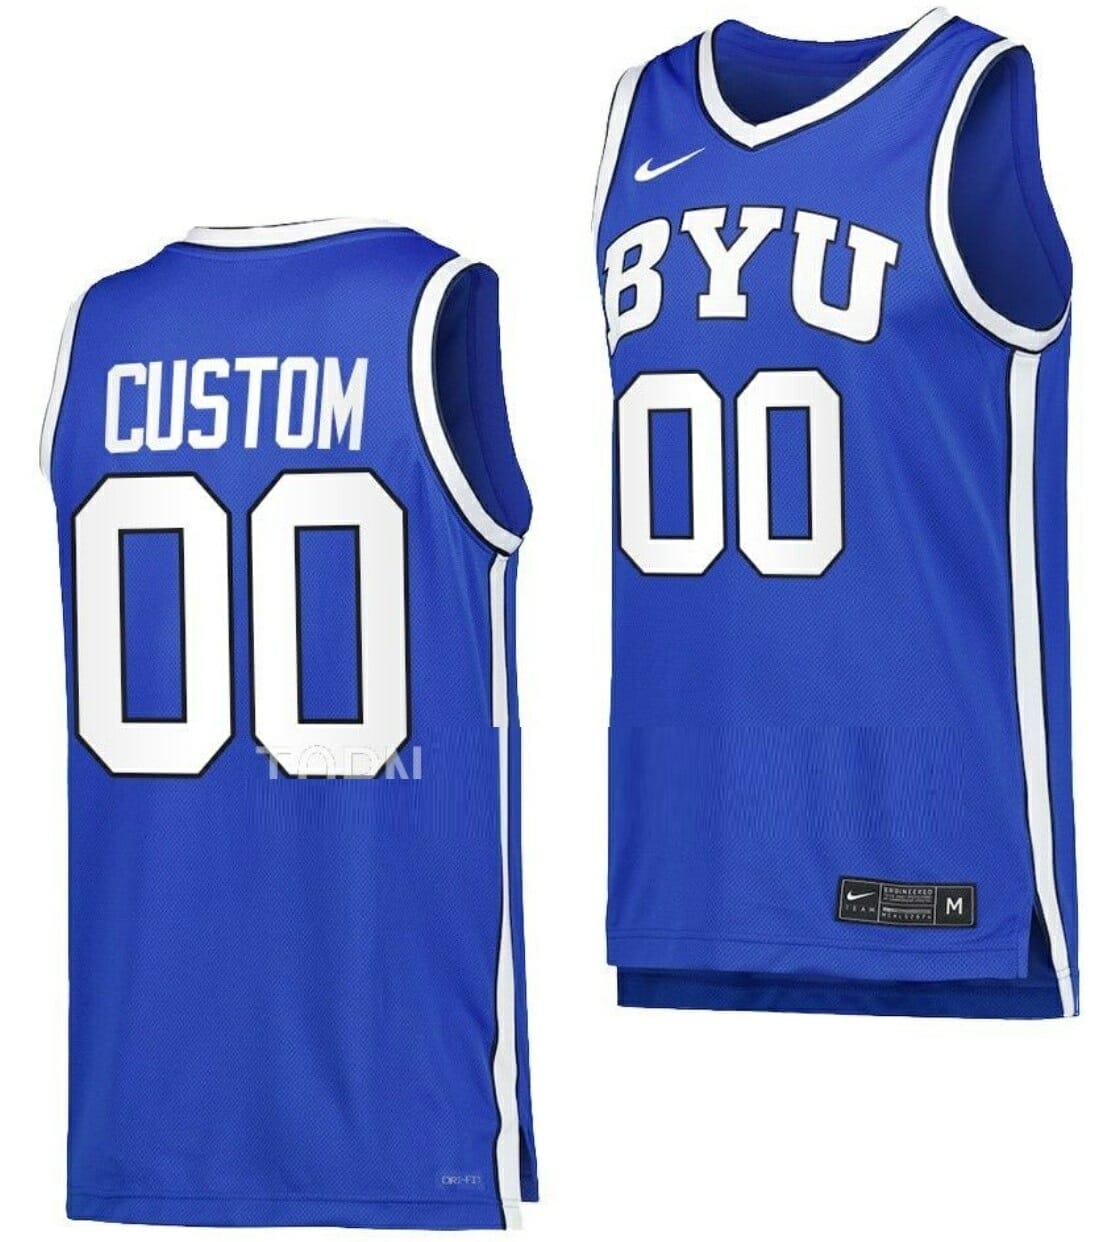 [Available] Buy New Custom BYU Cougars Jersey Royal